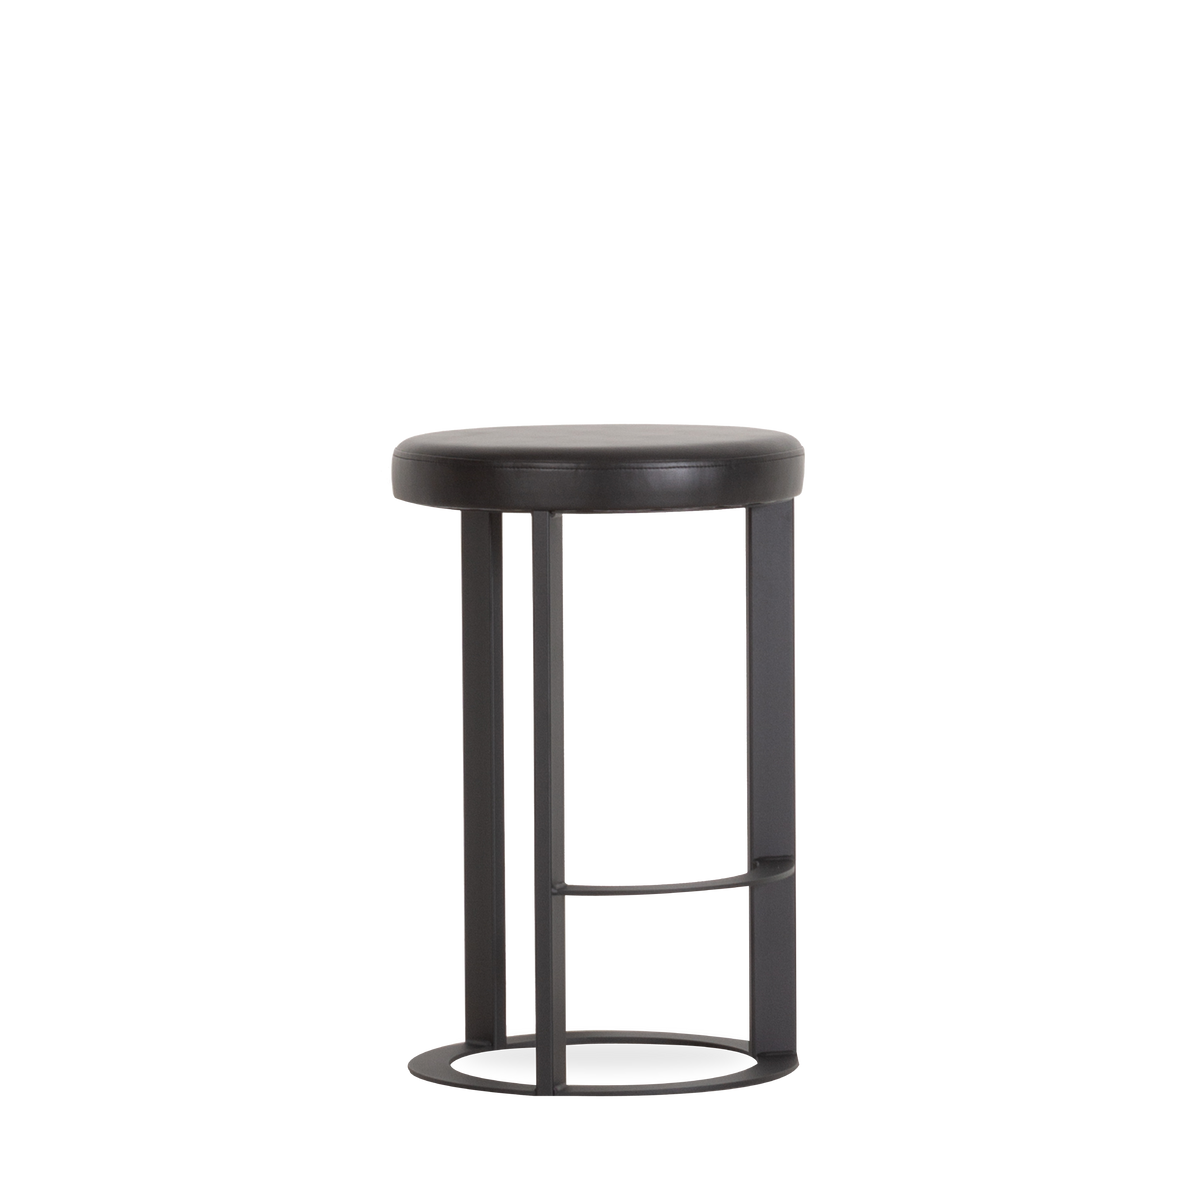 Topped in black vegan leather, the matte black-finished Cooper Counter Stool brings together a retro silhouette with an industrial edge.